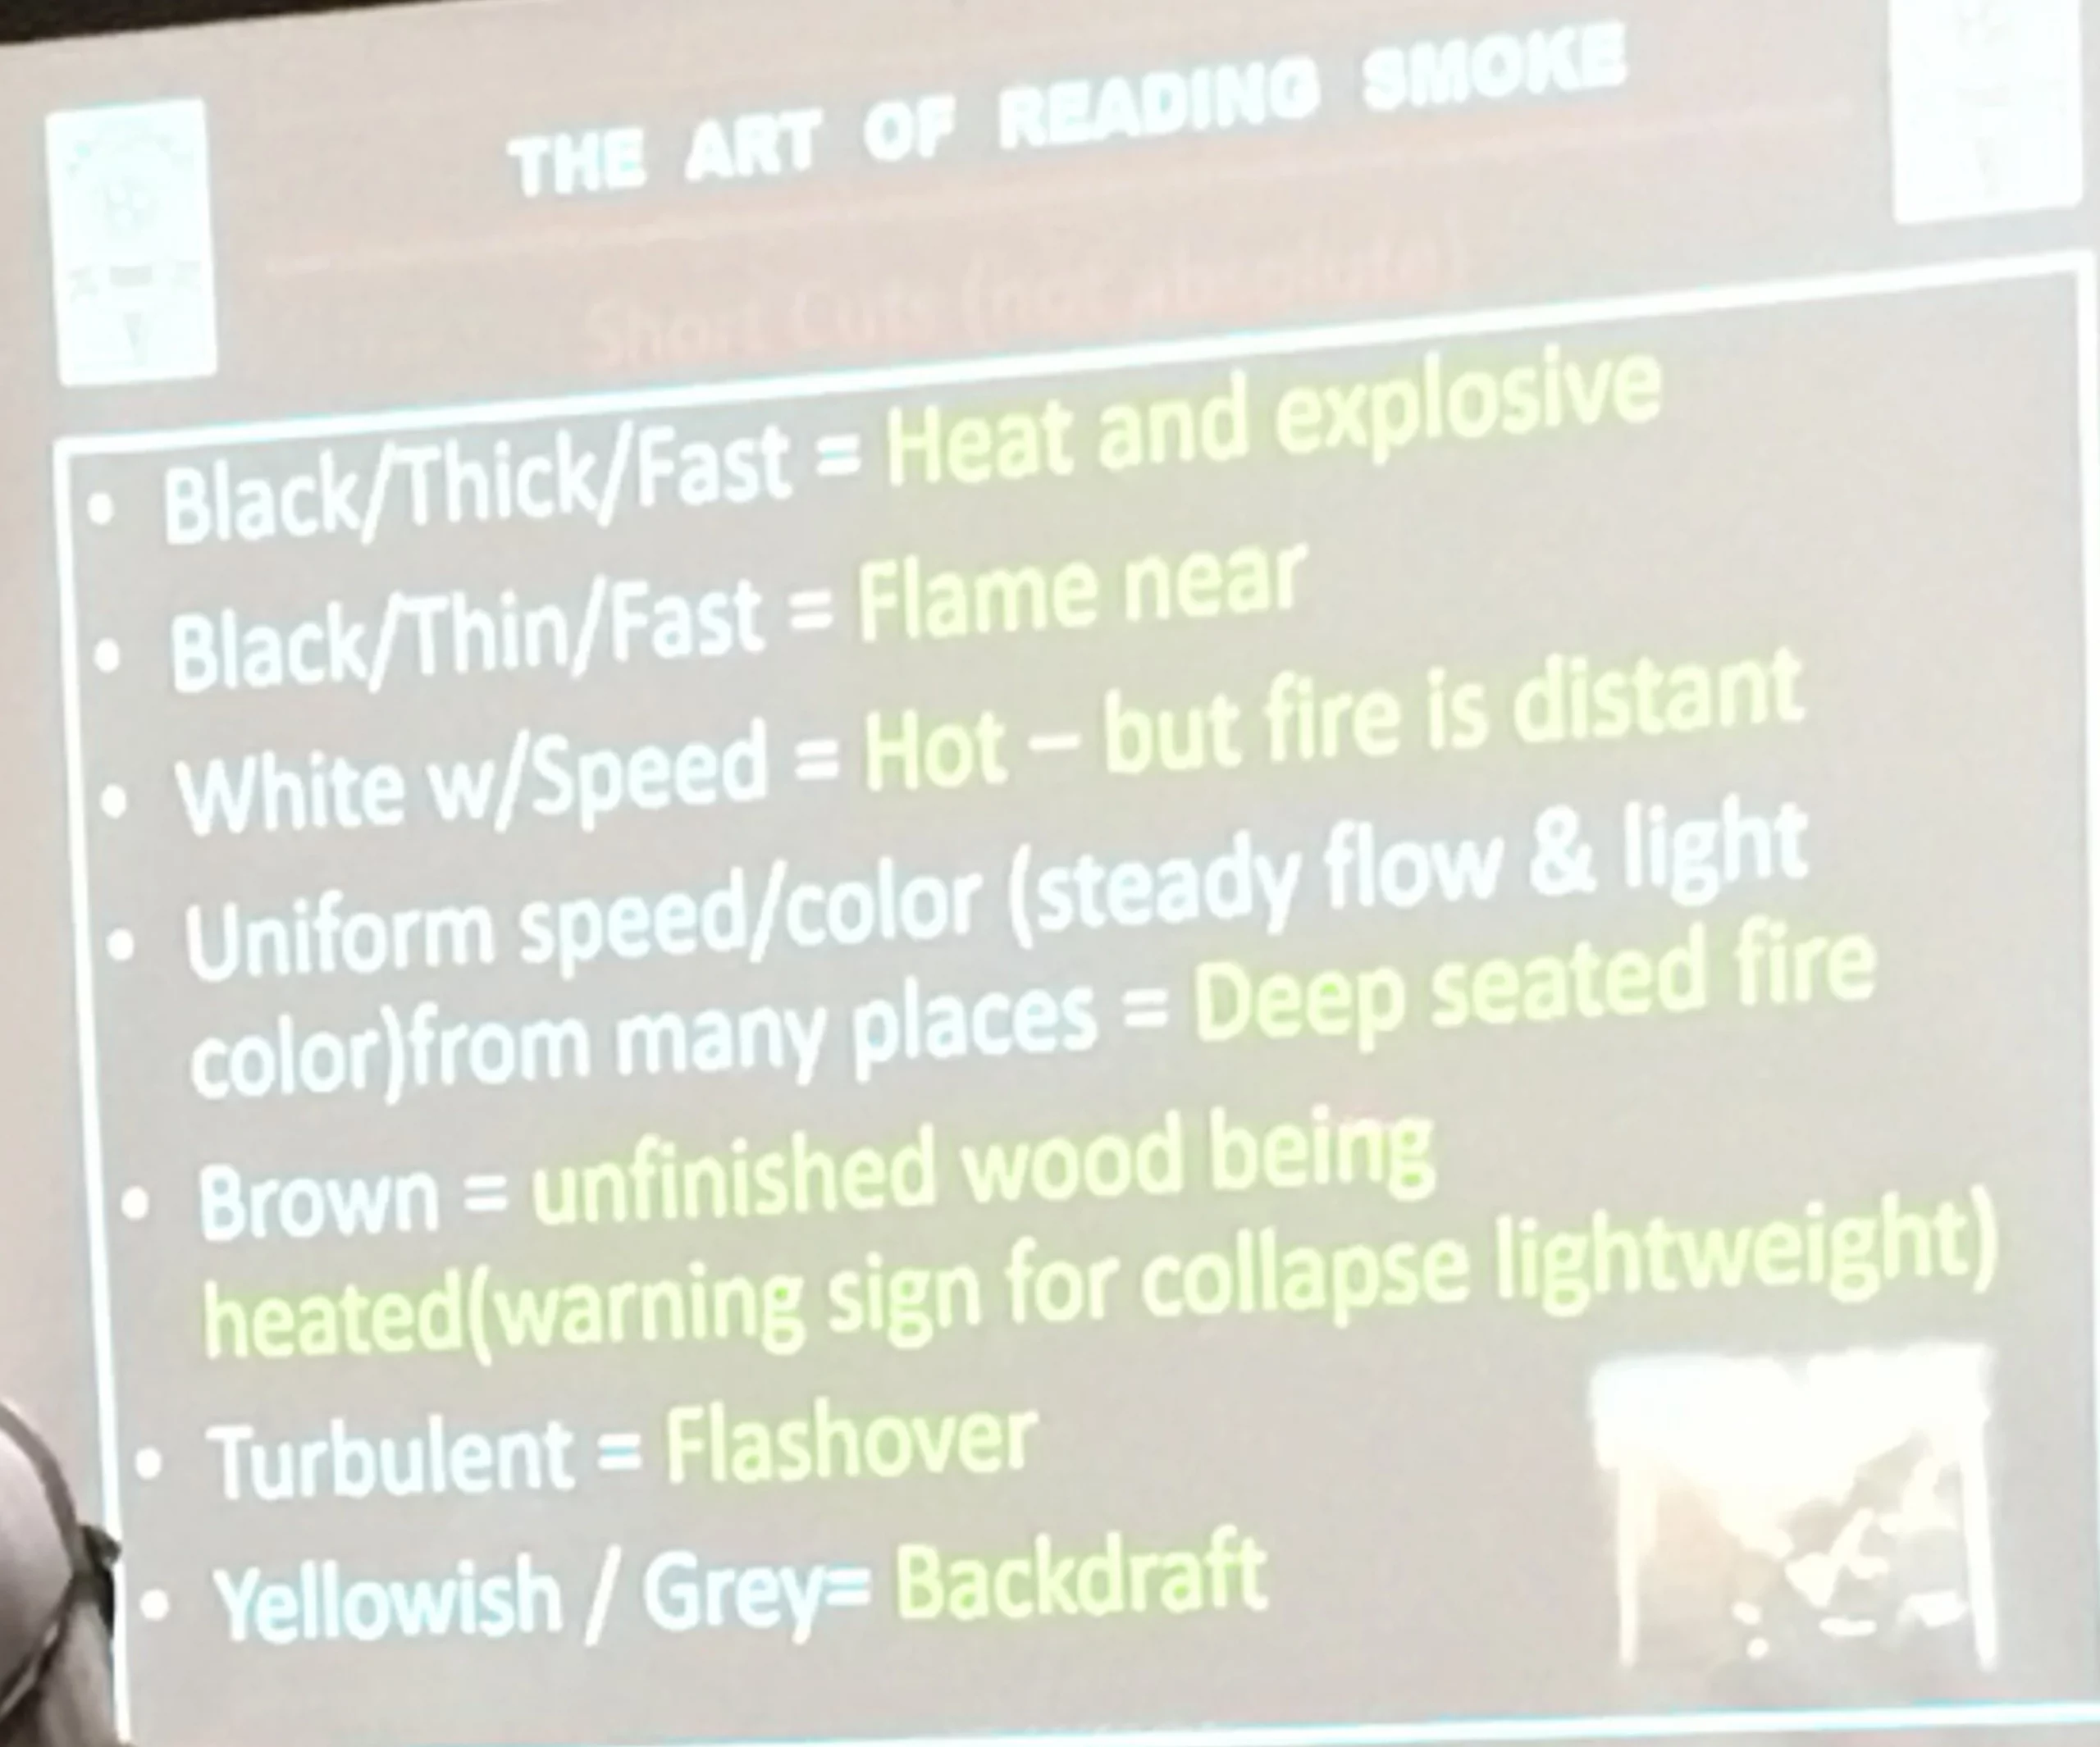 Notes about how to read smoke from a class at the Smoky Mountain Fire/Rescue Expo